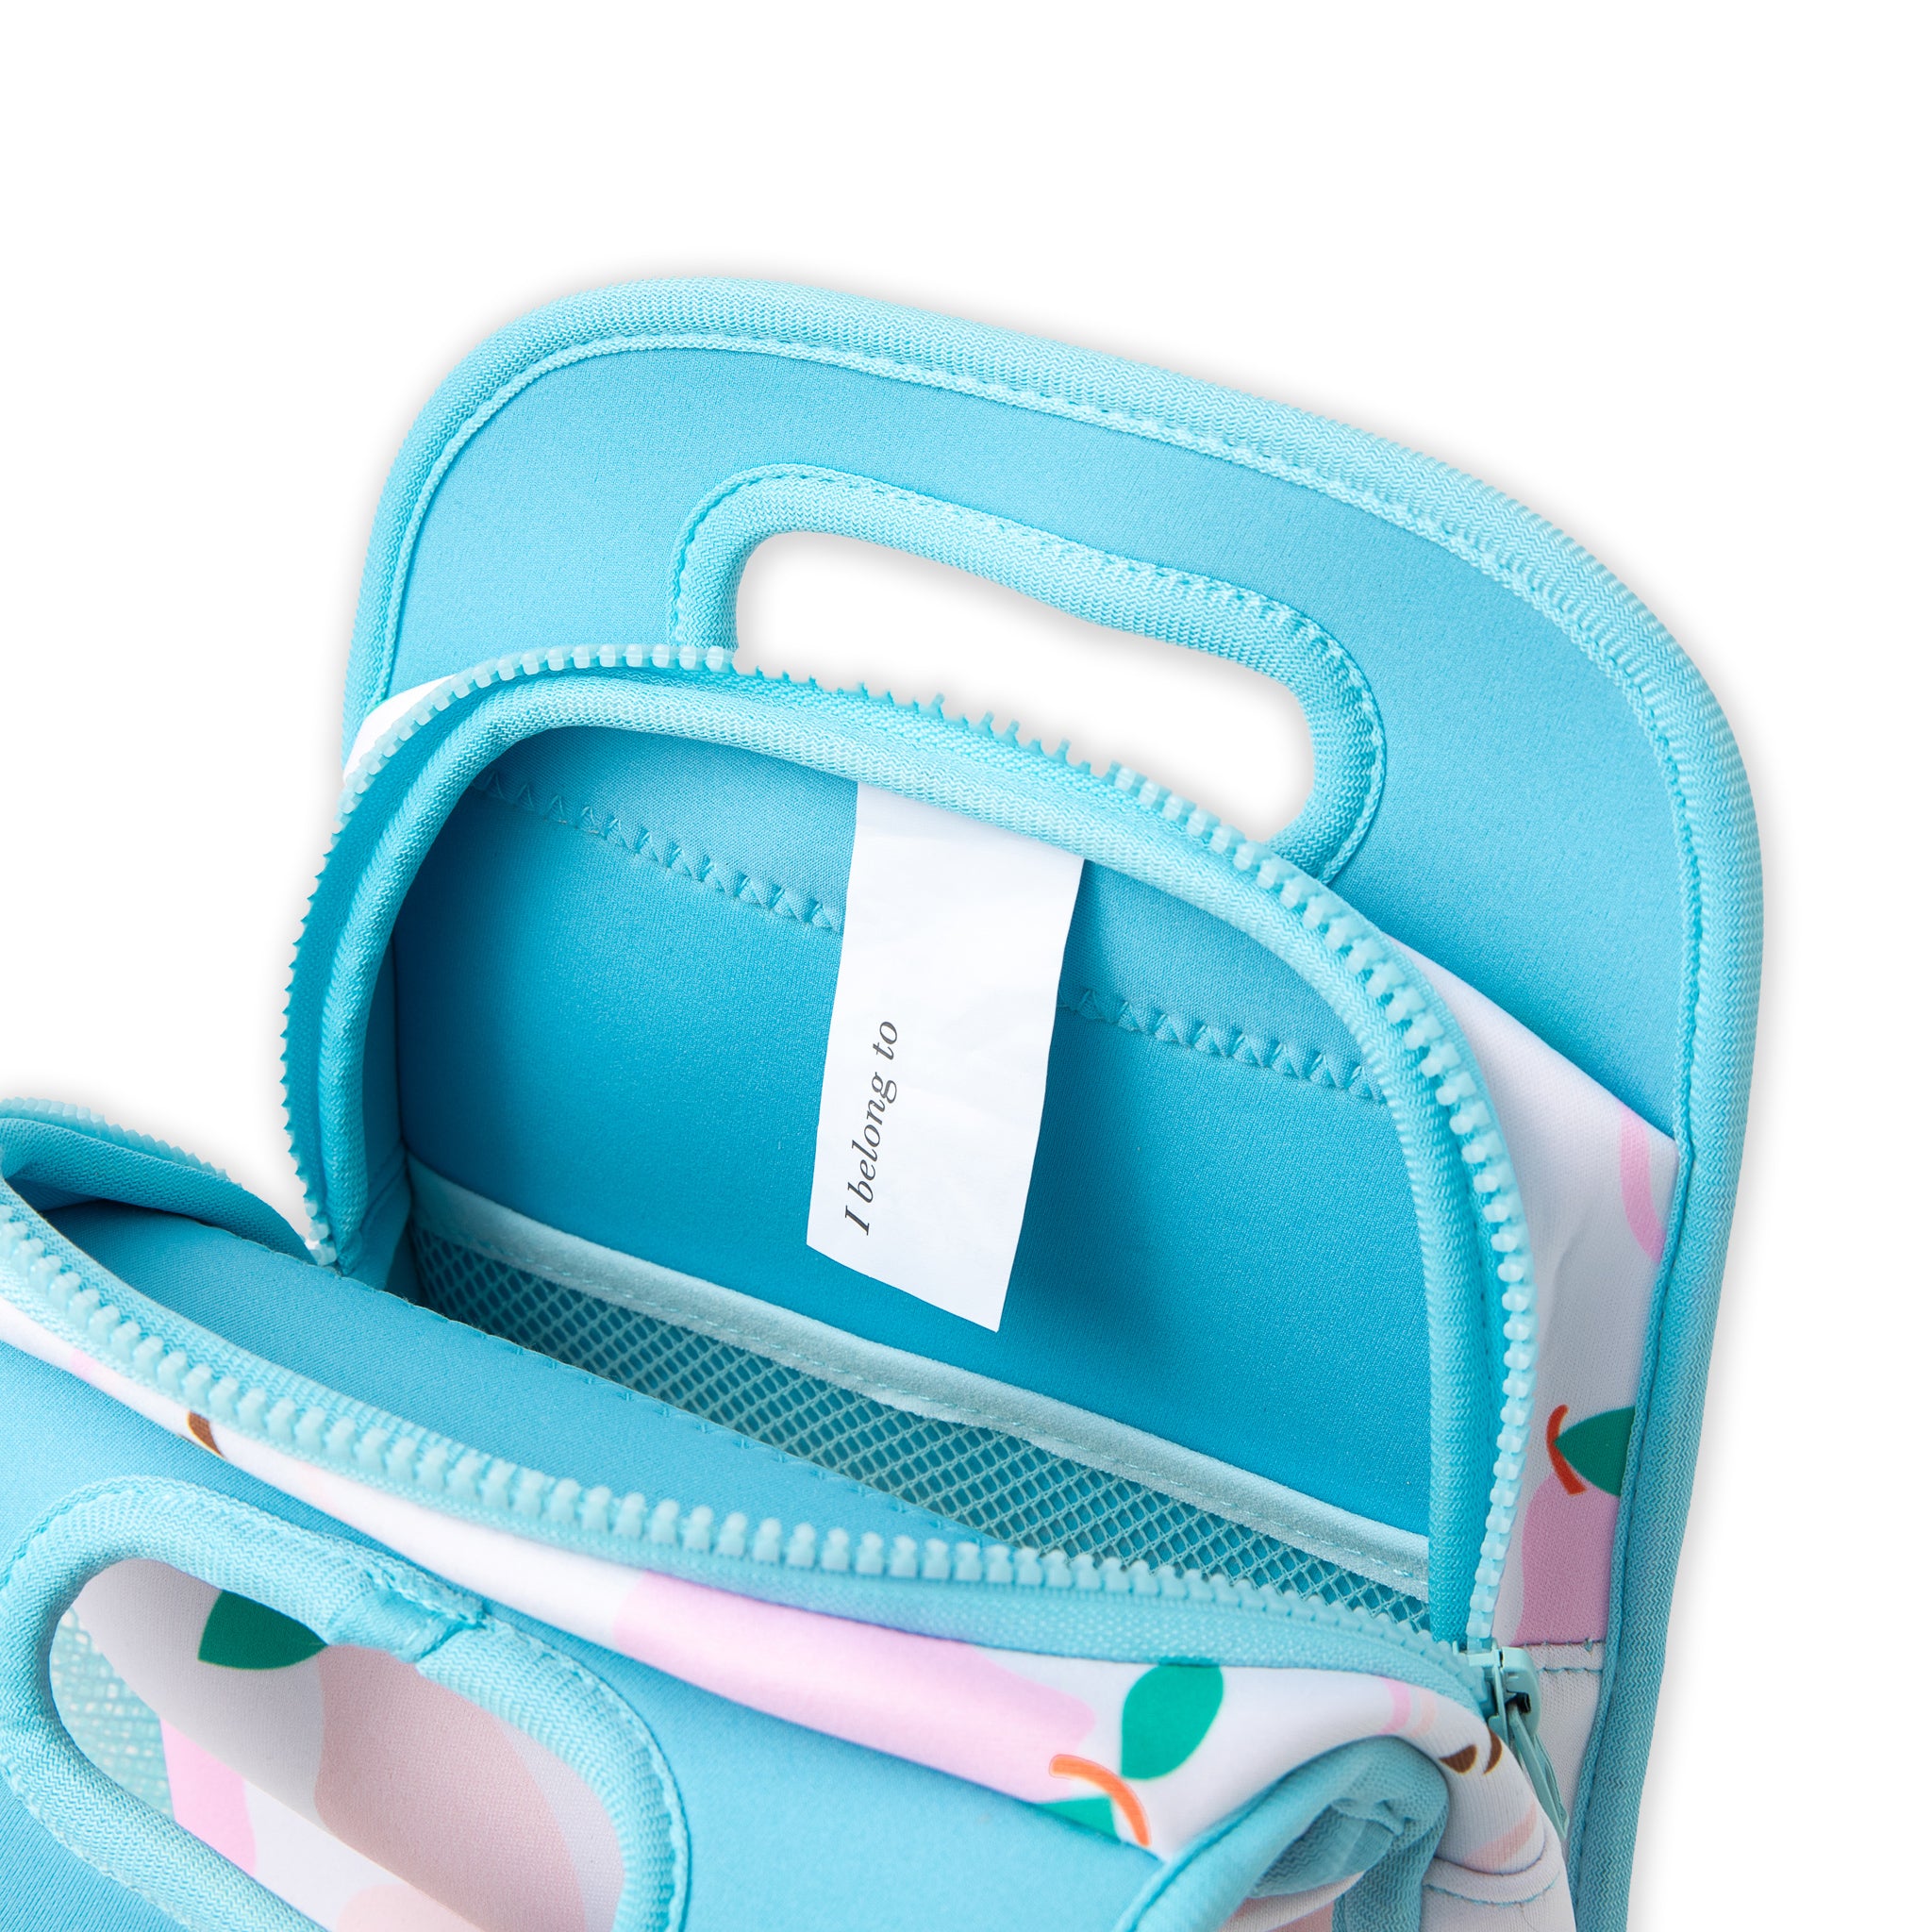 PINK PEARS WITH CONTRASTING LIGHT BLUE BINDING insulated neoprene lunch bags for kids - nudie rudie lunch box